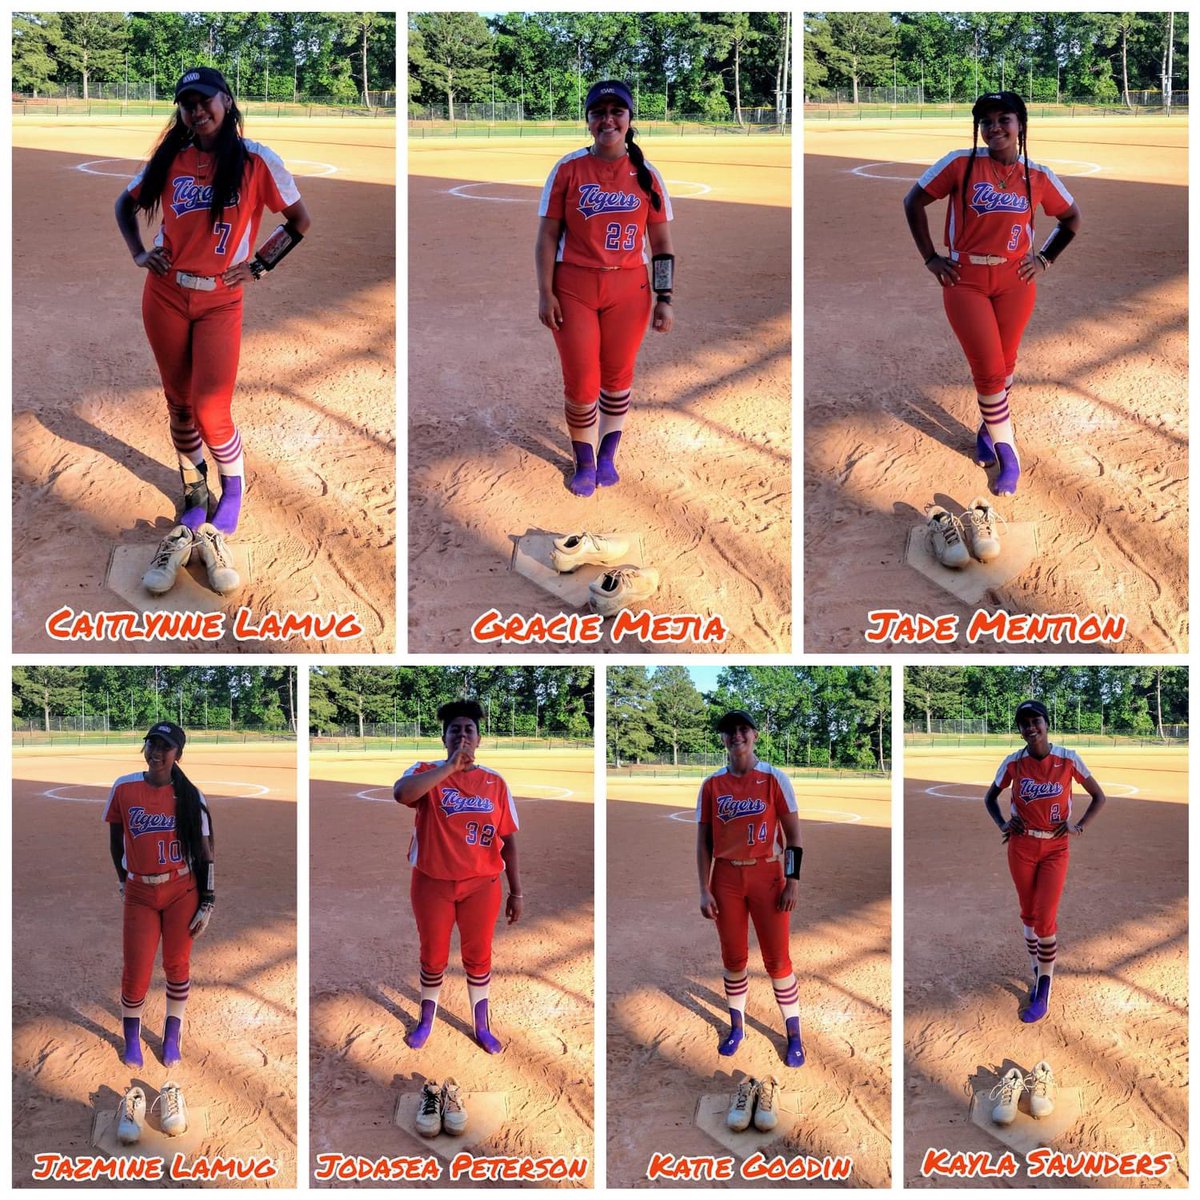 These 7 Seniors took their cleats off for the last time in their collegiate careers yesterday. 134-47 record 4 Straight Winning Seasons 2 HBCU National Championships 1 SIAC Conference Championship 1 SIAC Eastern Division Title #ThankYouSeniors! #TigerPride!🐅🥎